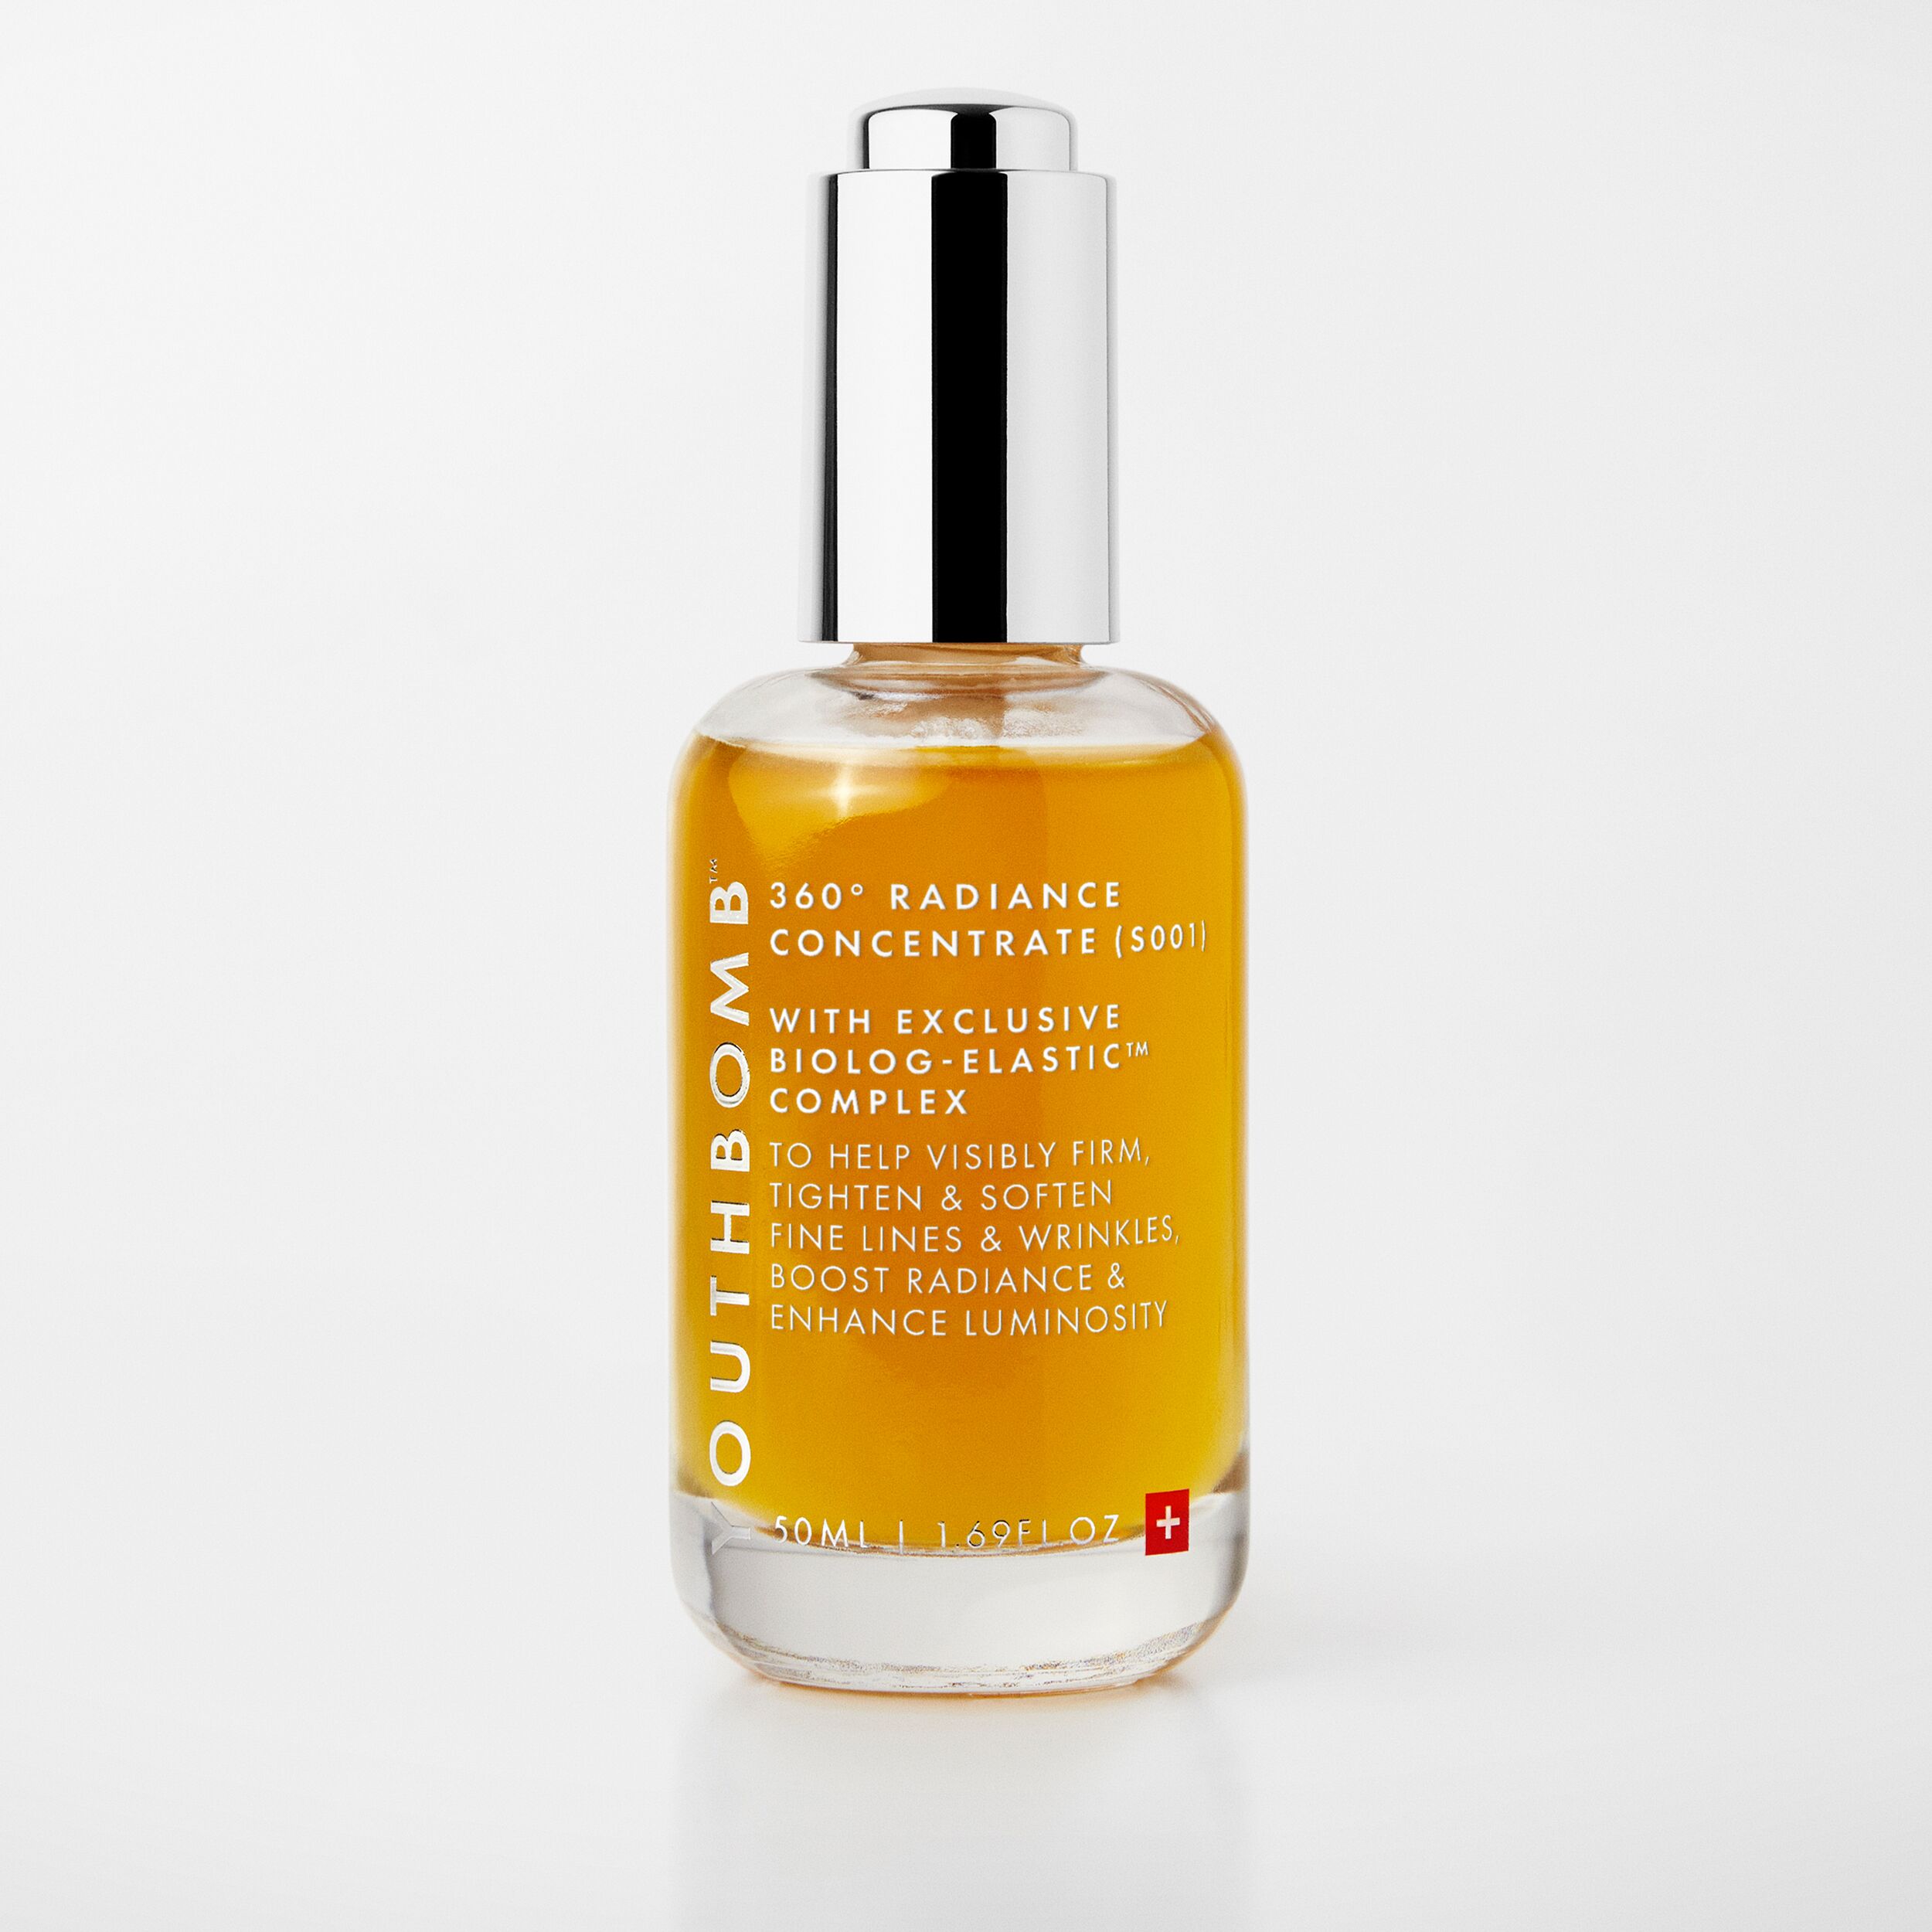 Youthbomb™, 360° Radiance Concentrate Serum